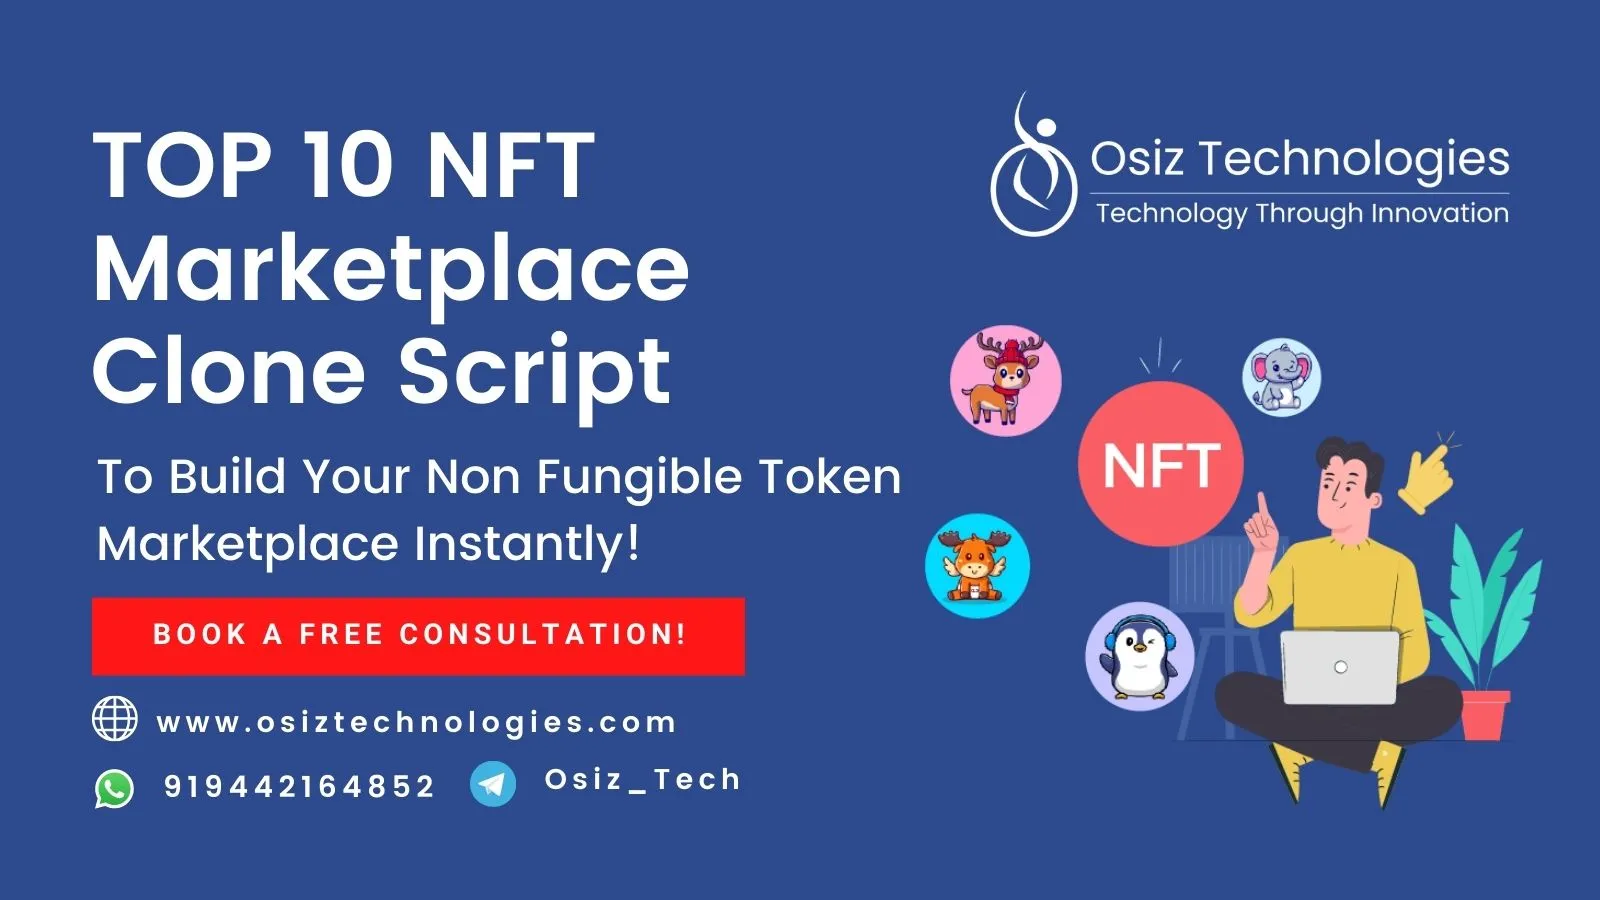 Top 10 NFT Marketplace Clone Script To Build Your NFT Marketplace Instantly!